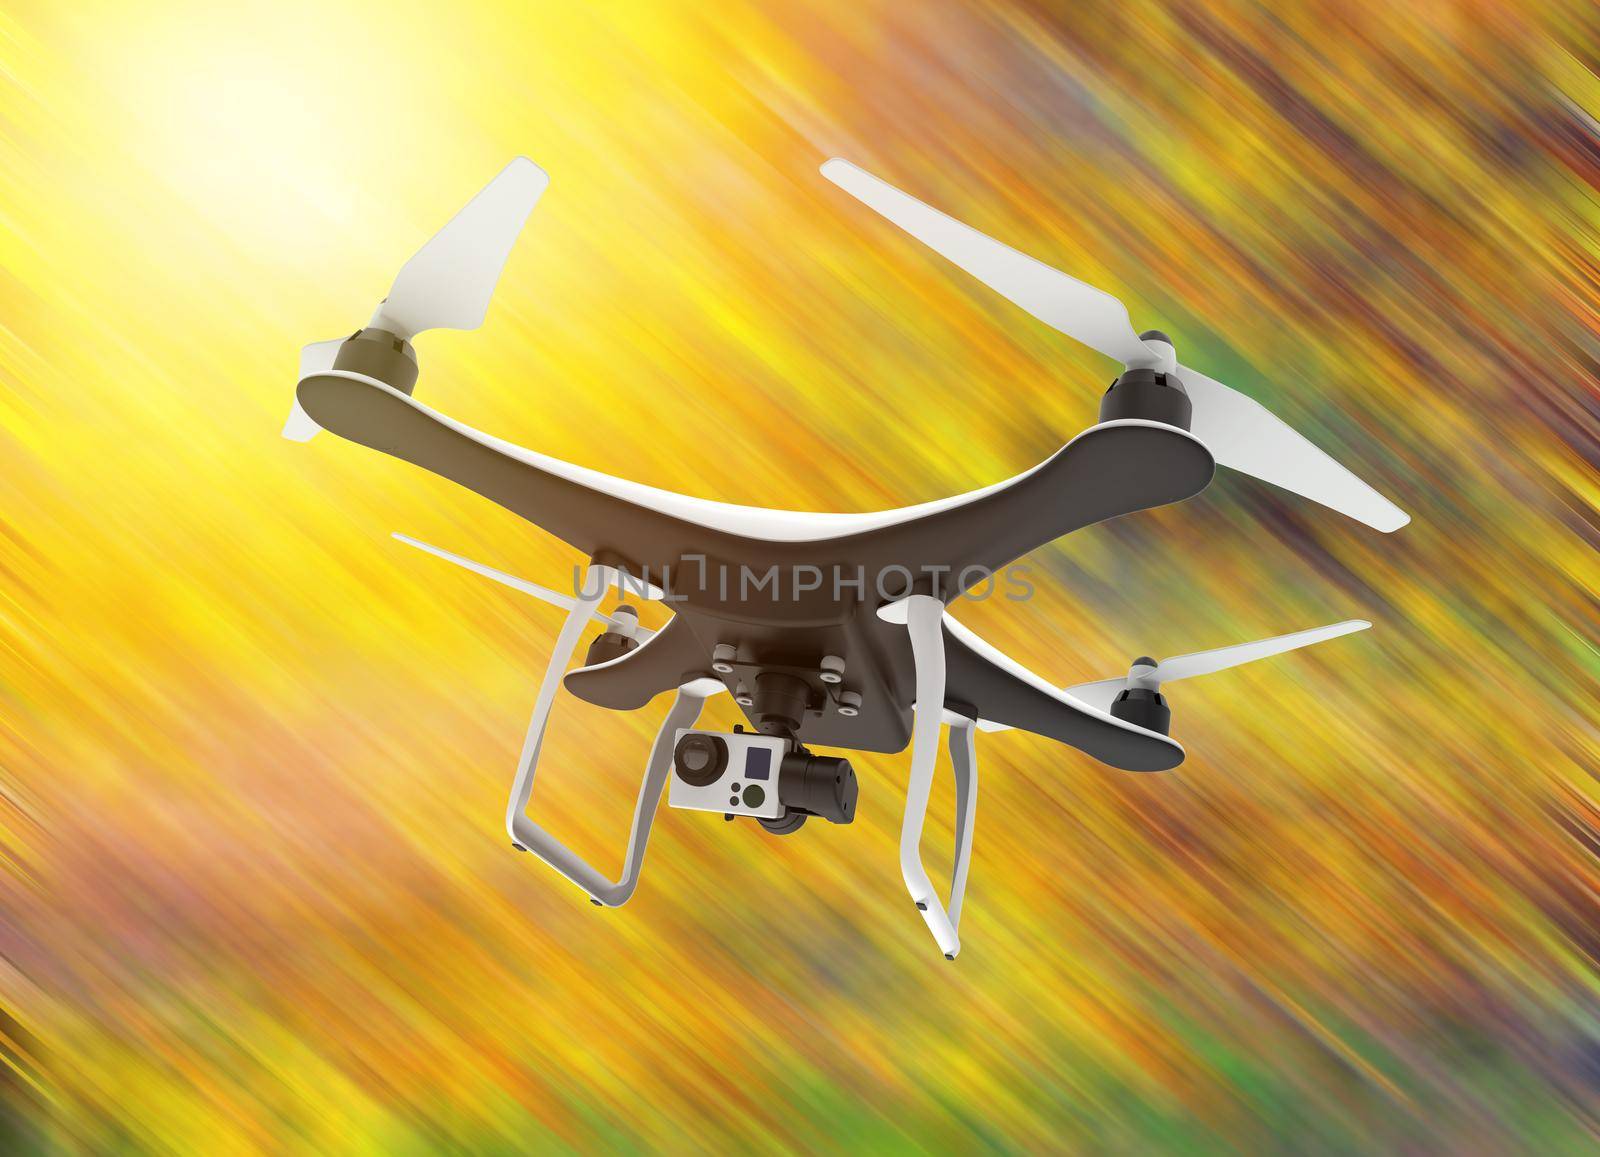 Drone with digital camera flying on a yellow background by cla78